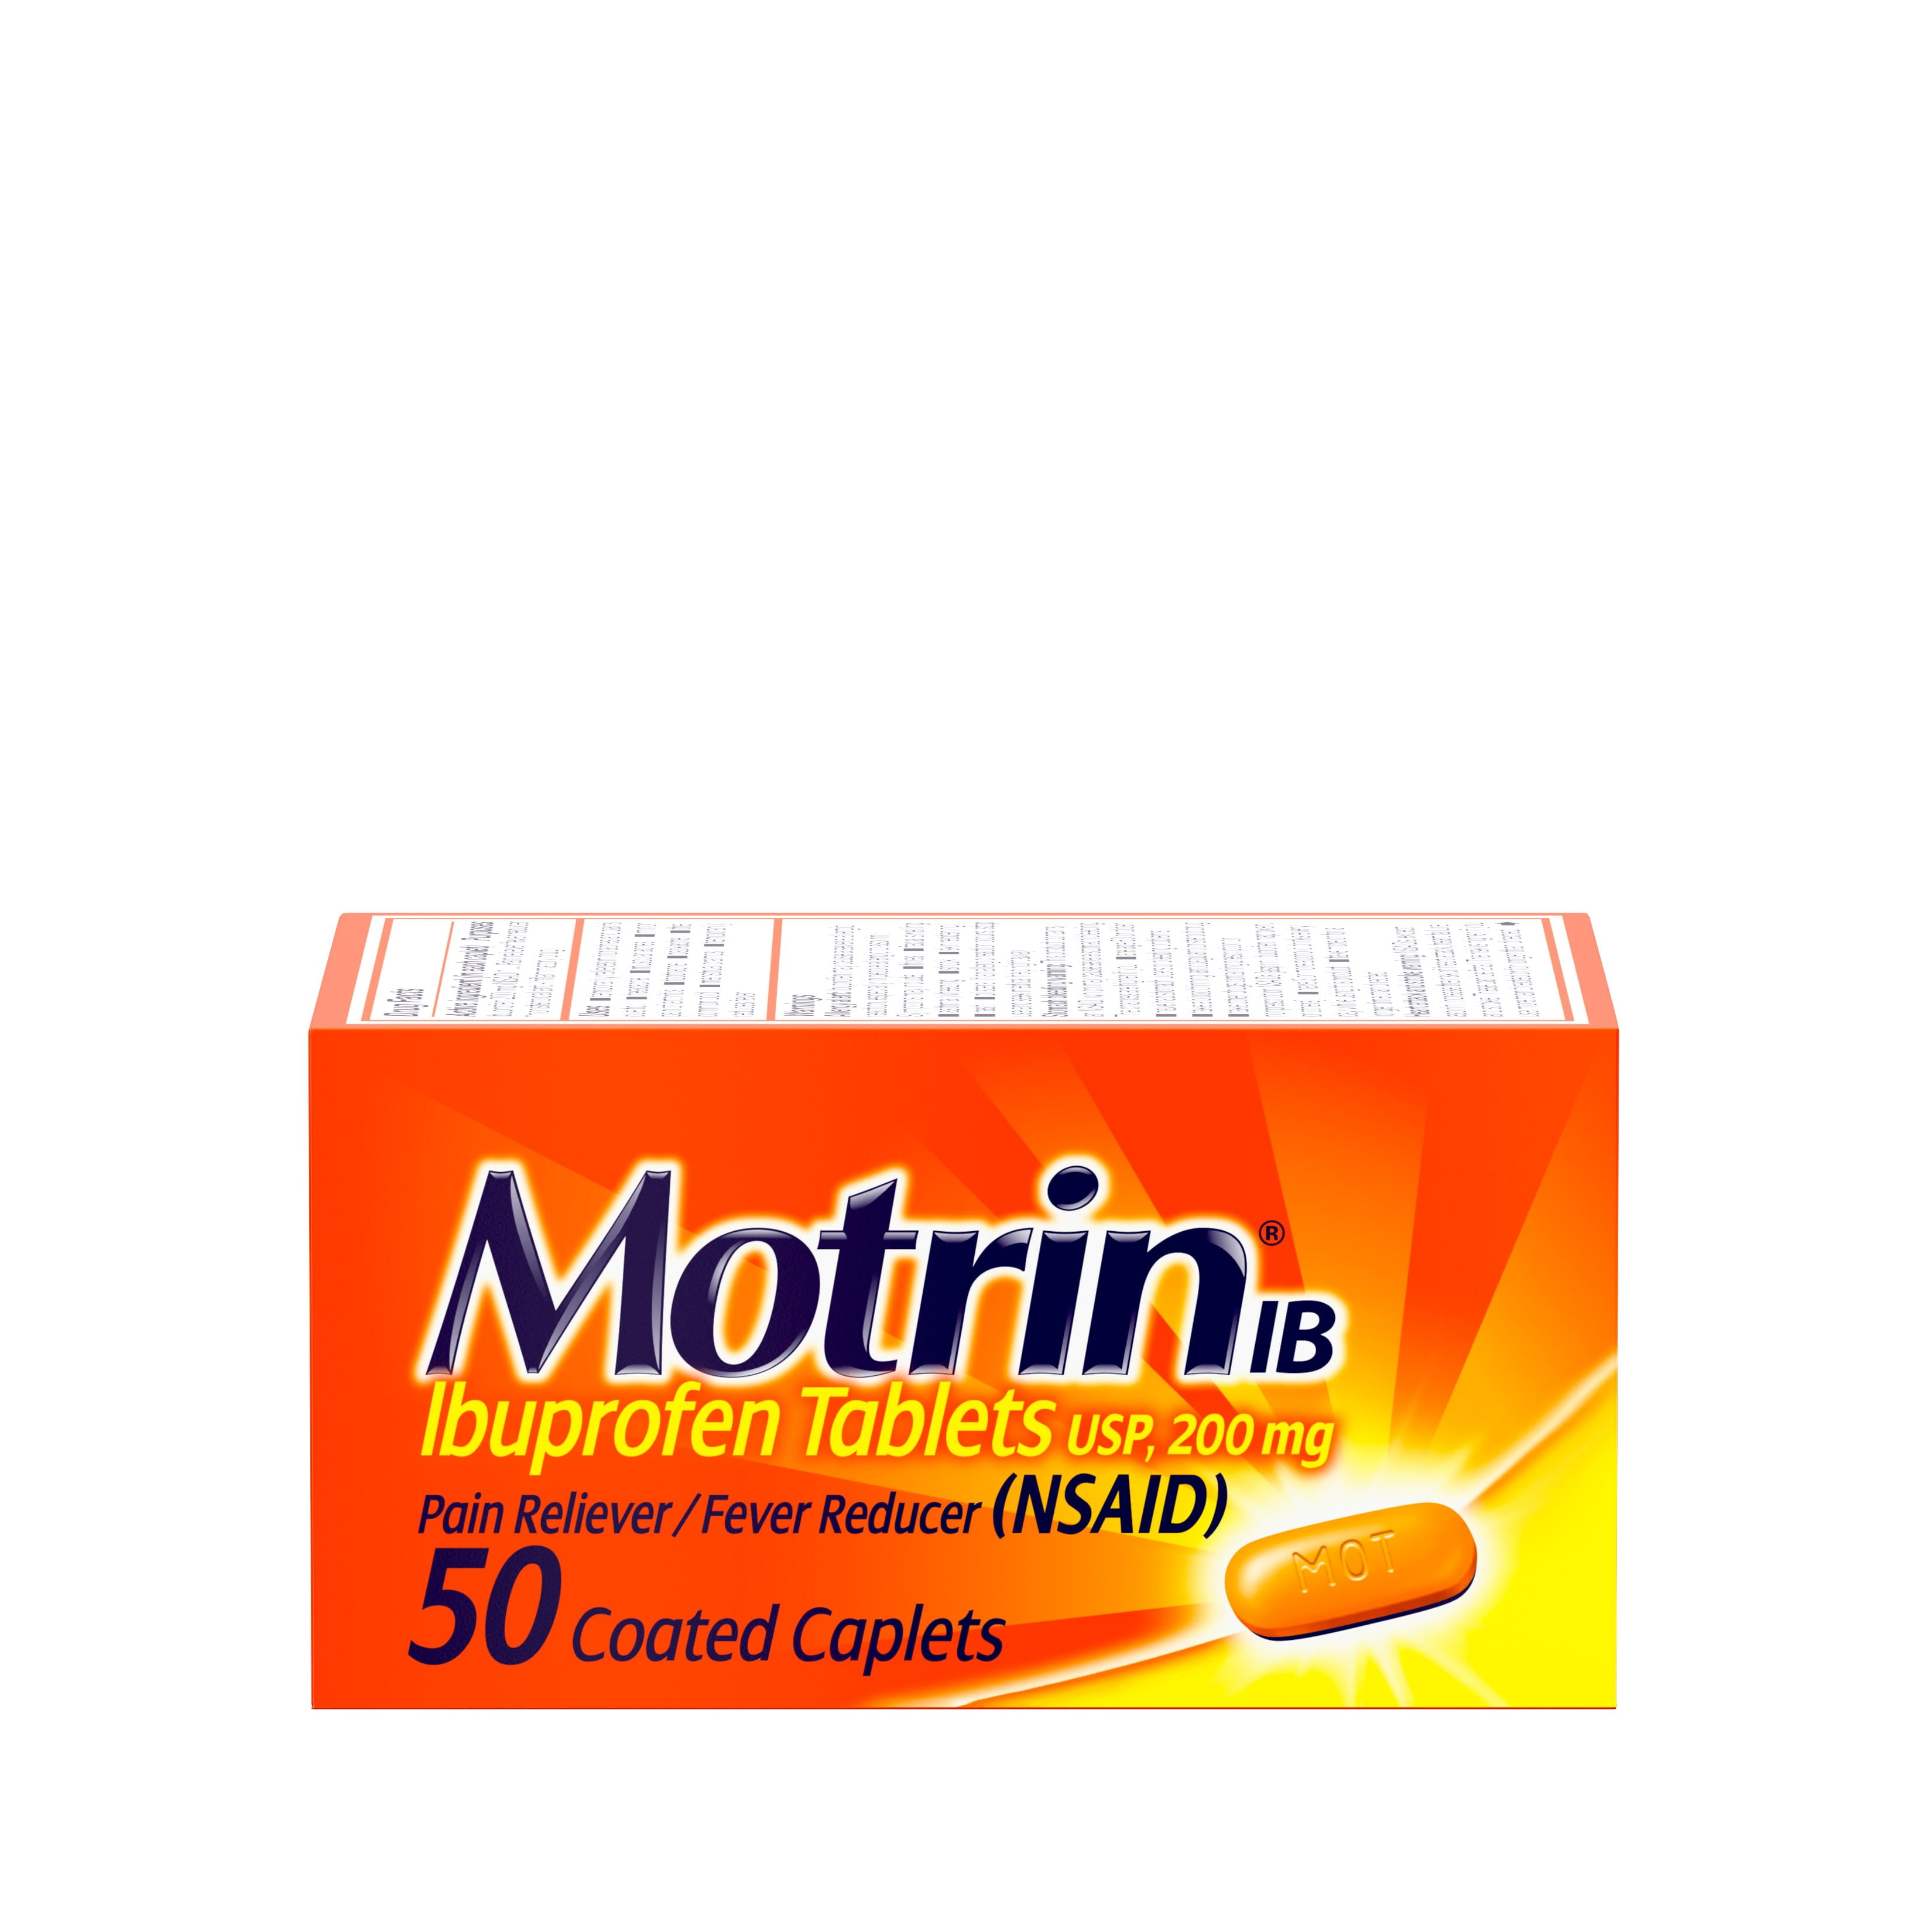 Motrin IB, Ibuprofen 200mg Tablets for Pain & Fever Relief, 50 Ct